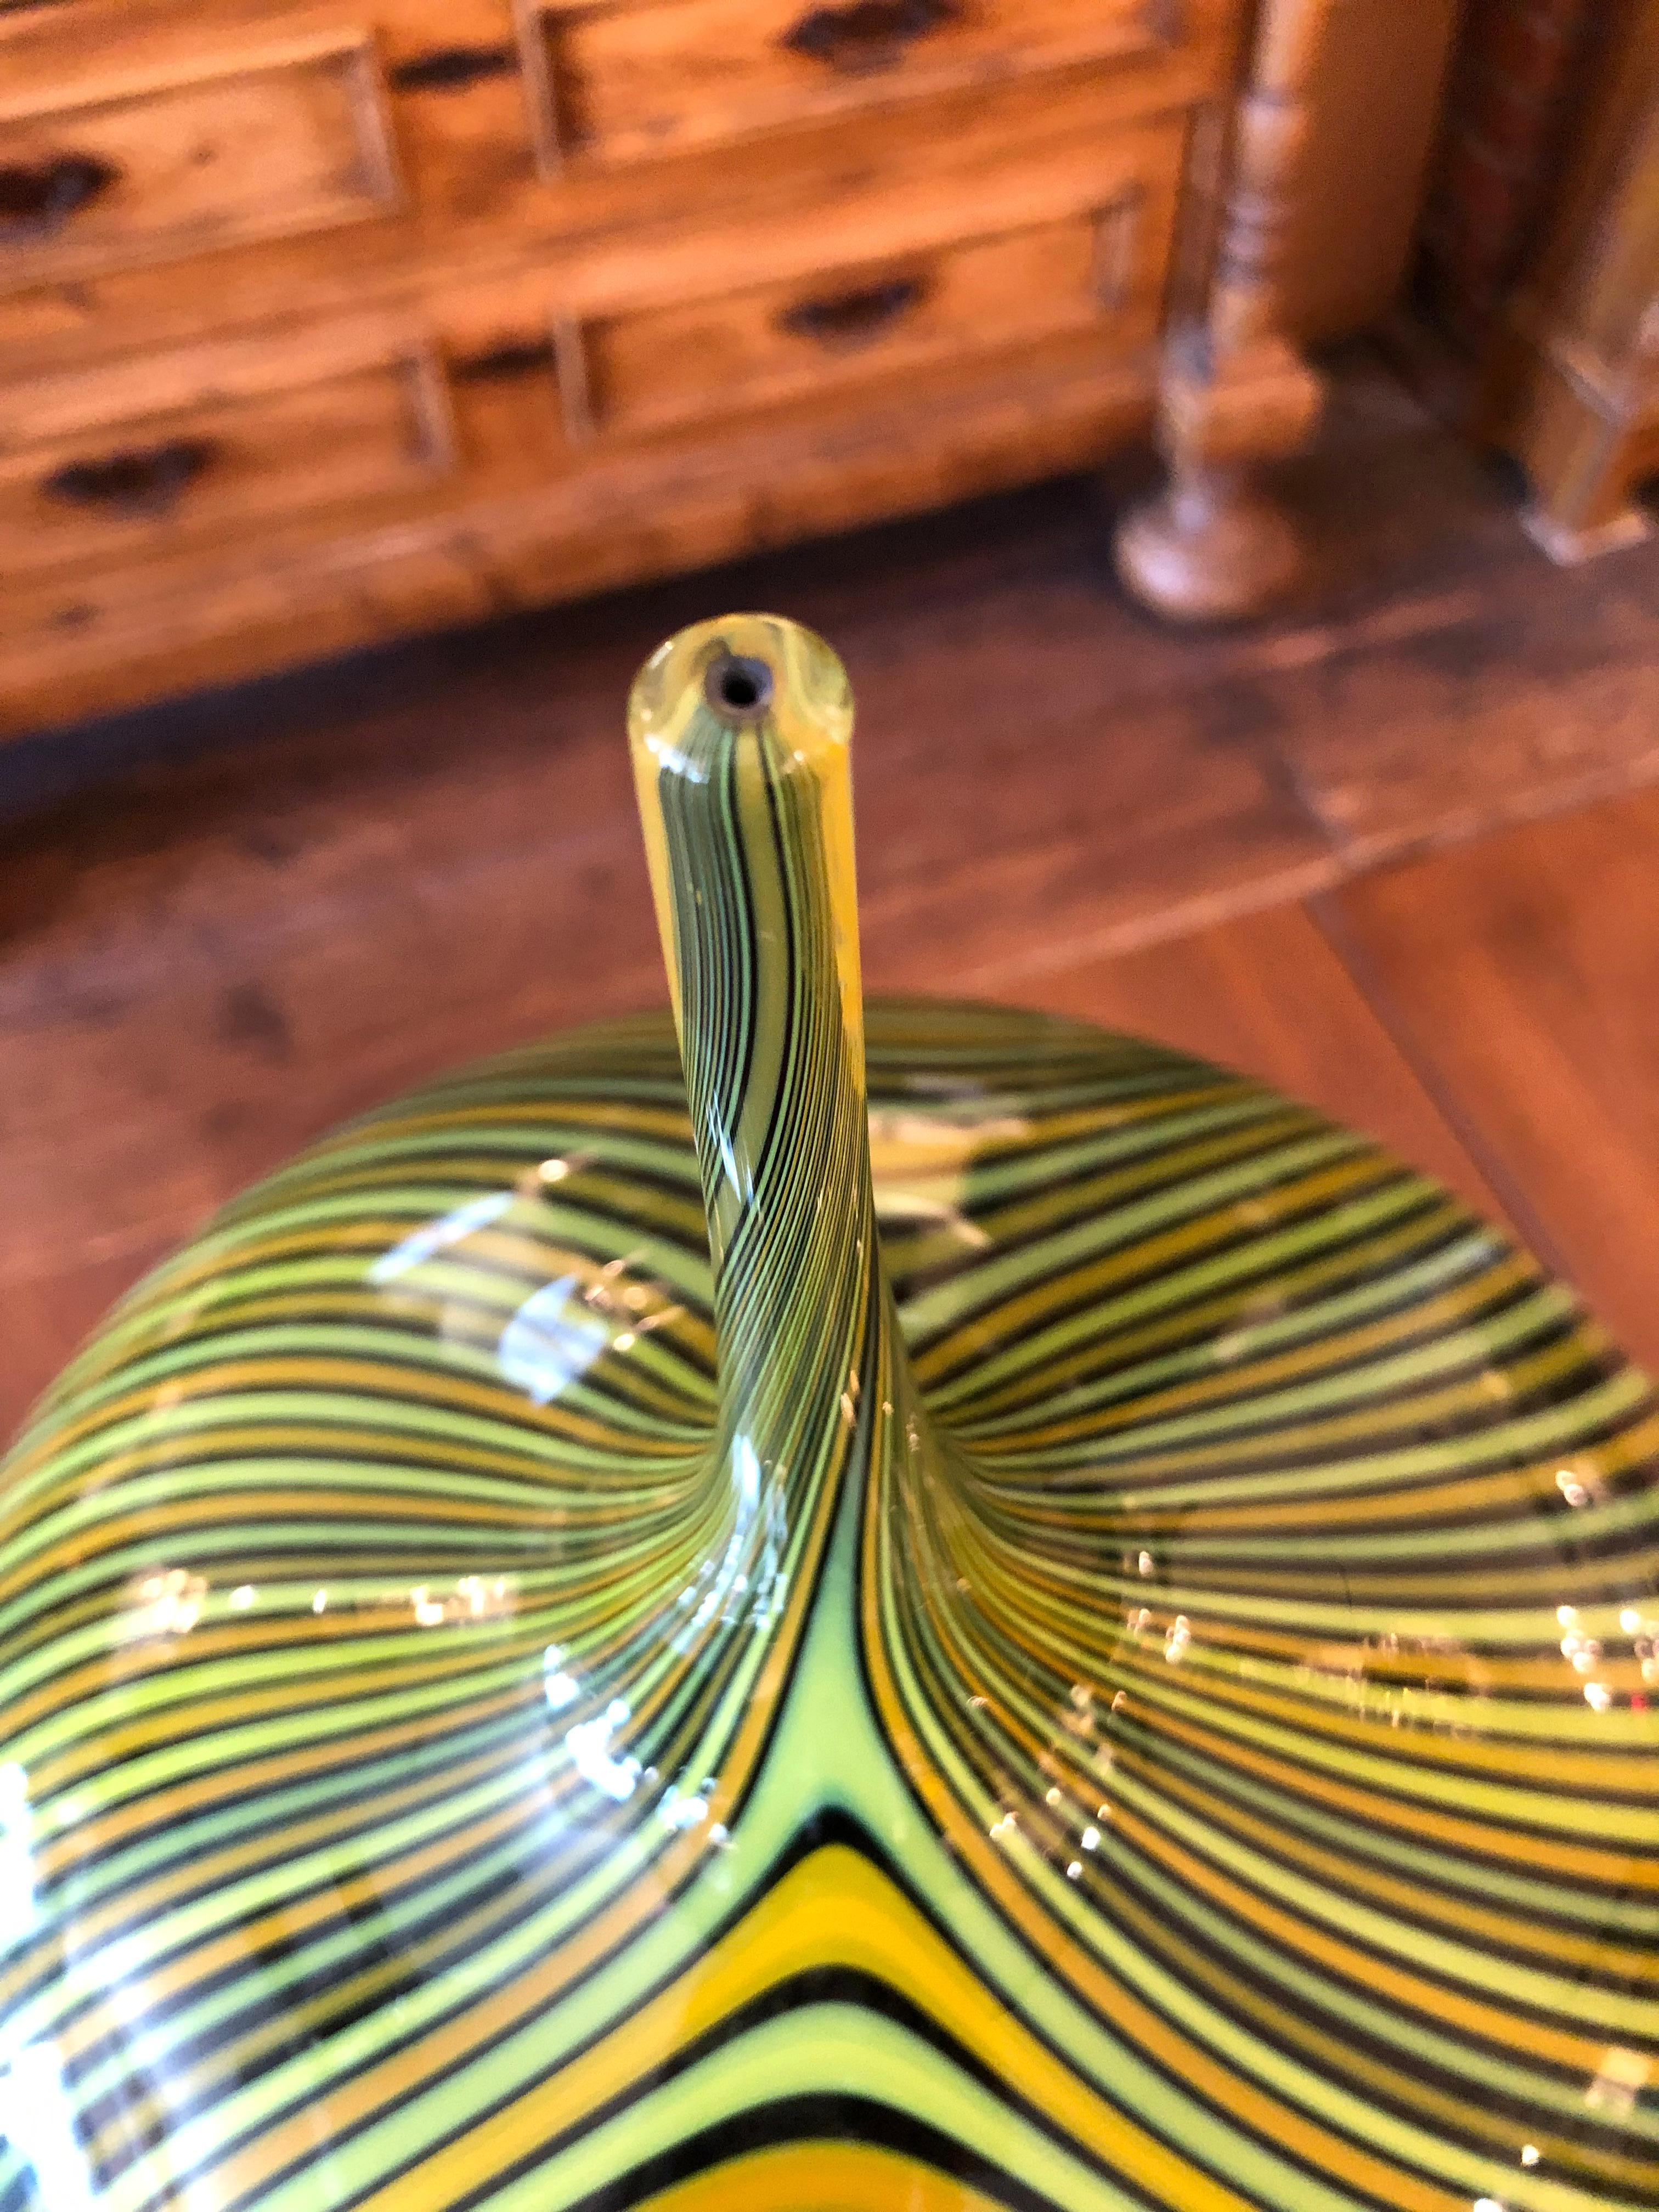 Two sought after very large impressive and beautiful blown glass vessels by Canadian artist Jeff Holmwood, purchased at the Museum of Glass in Tacoma Washington. Holmwood's signature series, the one for which he is known best, is his blown glass